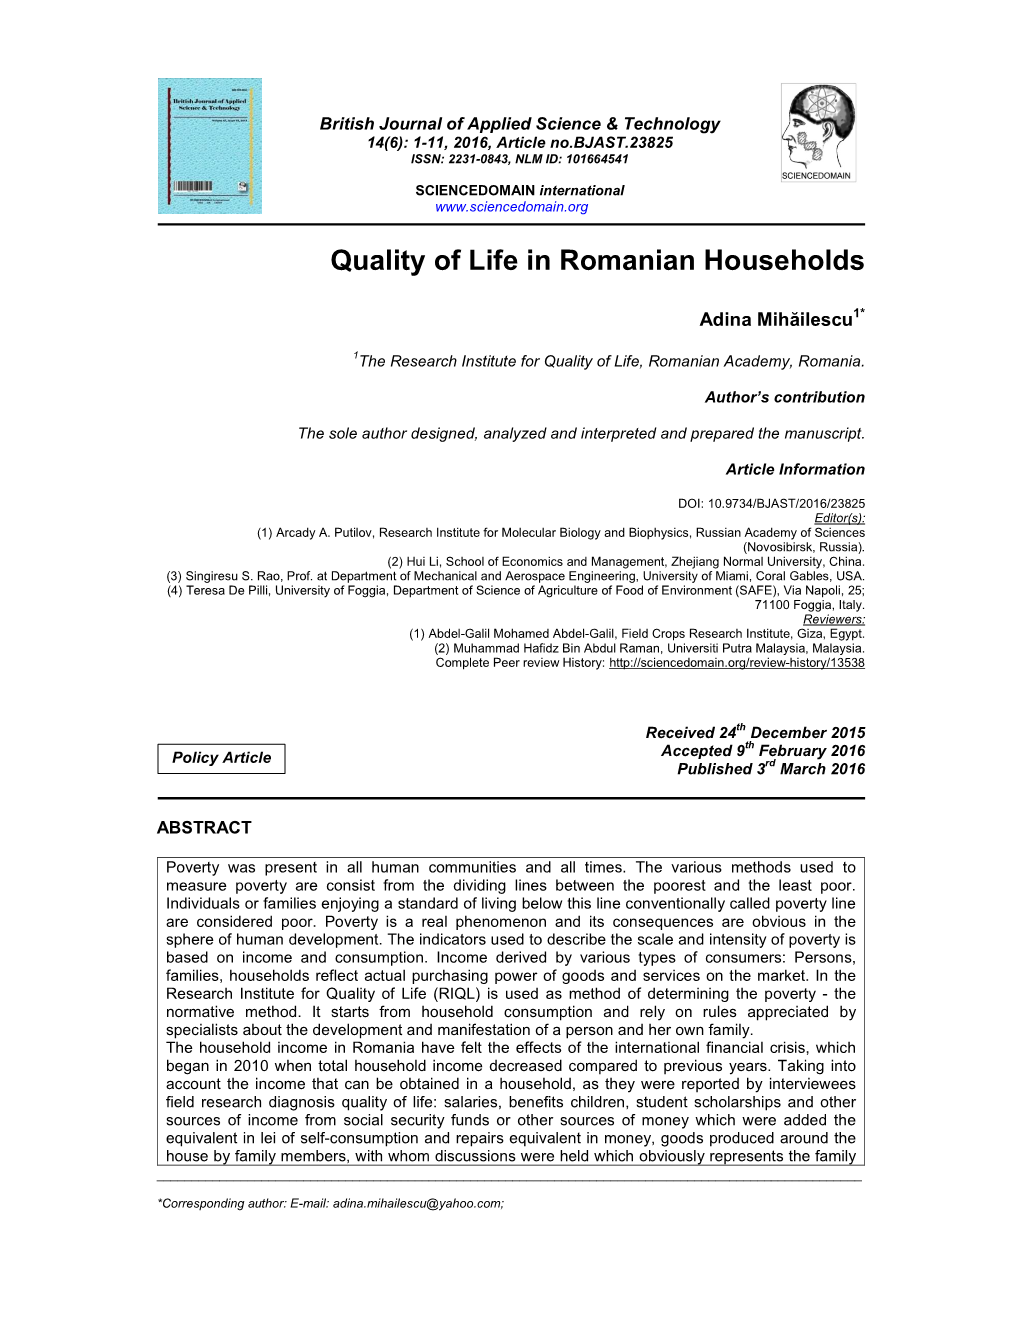 Quality of Life in Romanian Households